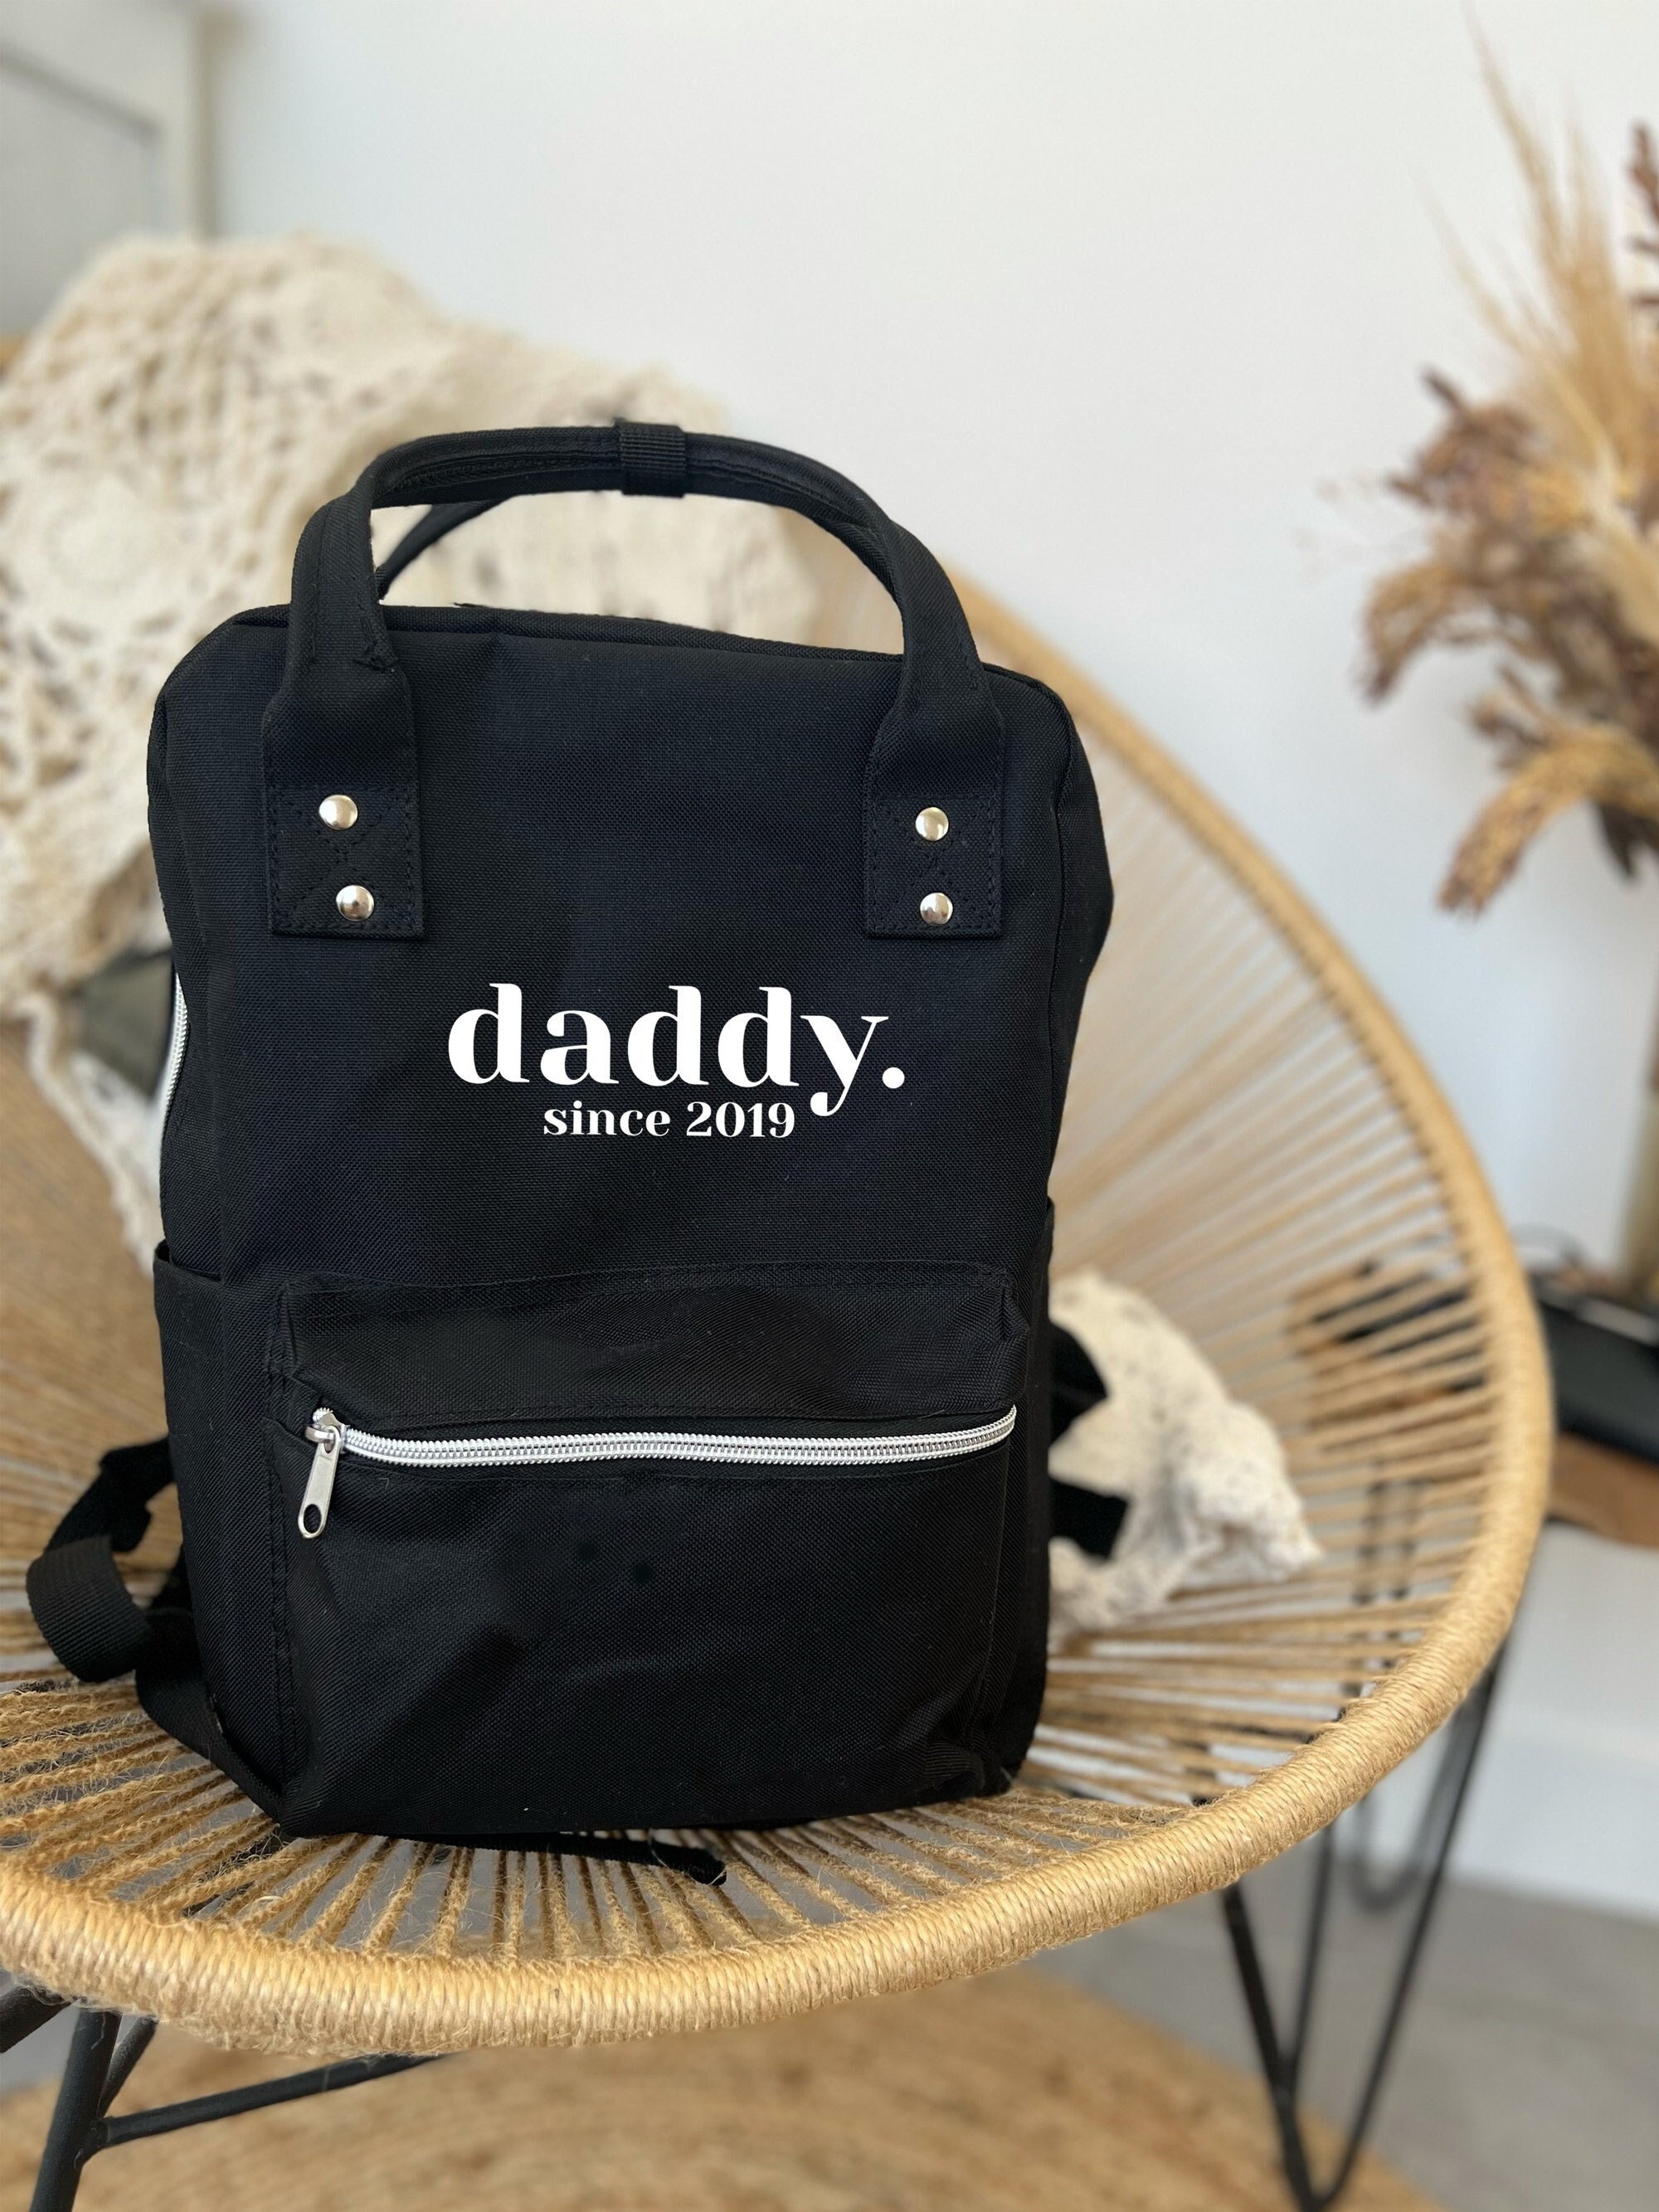 Custom Backpack for Dad - Daddy since Backpack - Adult Satchel - Father's  Day Gift - Daddy since - Satchel Bag - Man